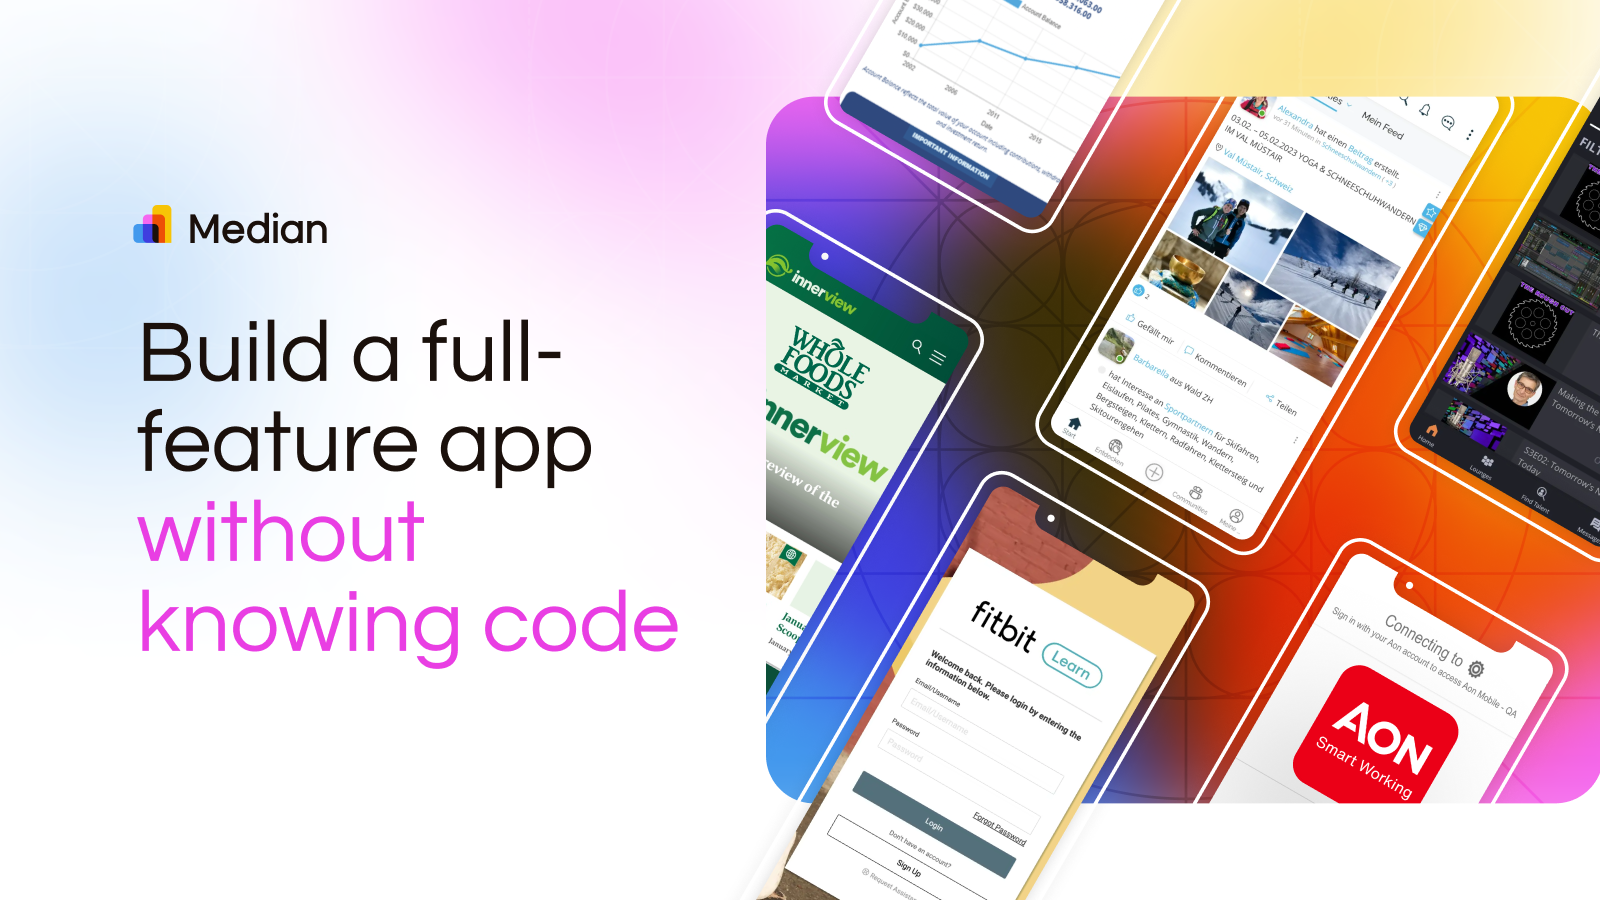 Use Median.co to build a full-feature app without knowing code